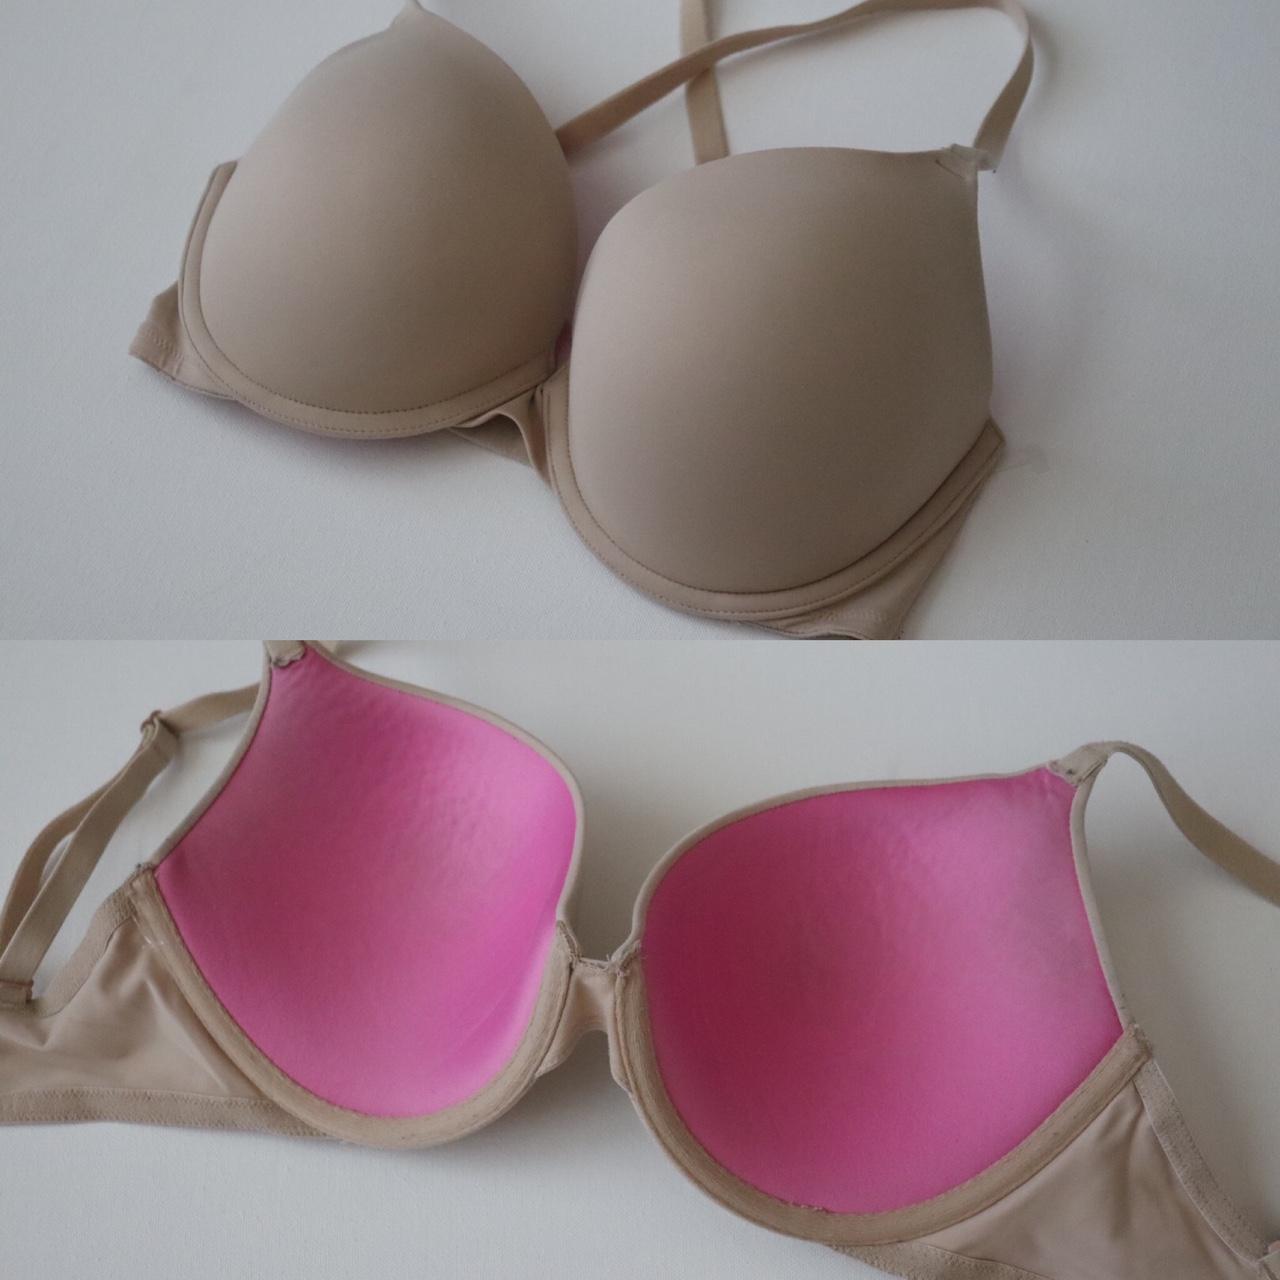 Bra, Padded Bra In Cream Colour Not Used At All